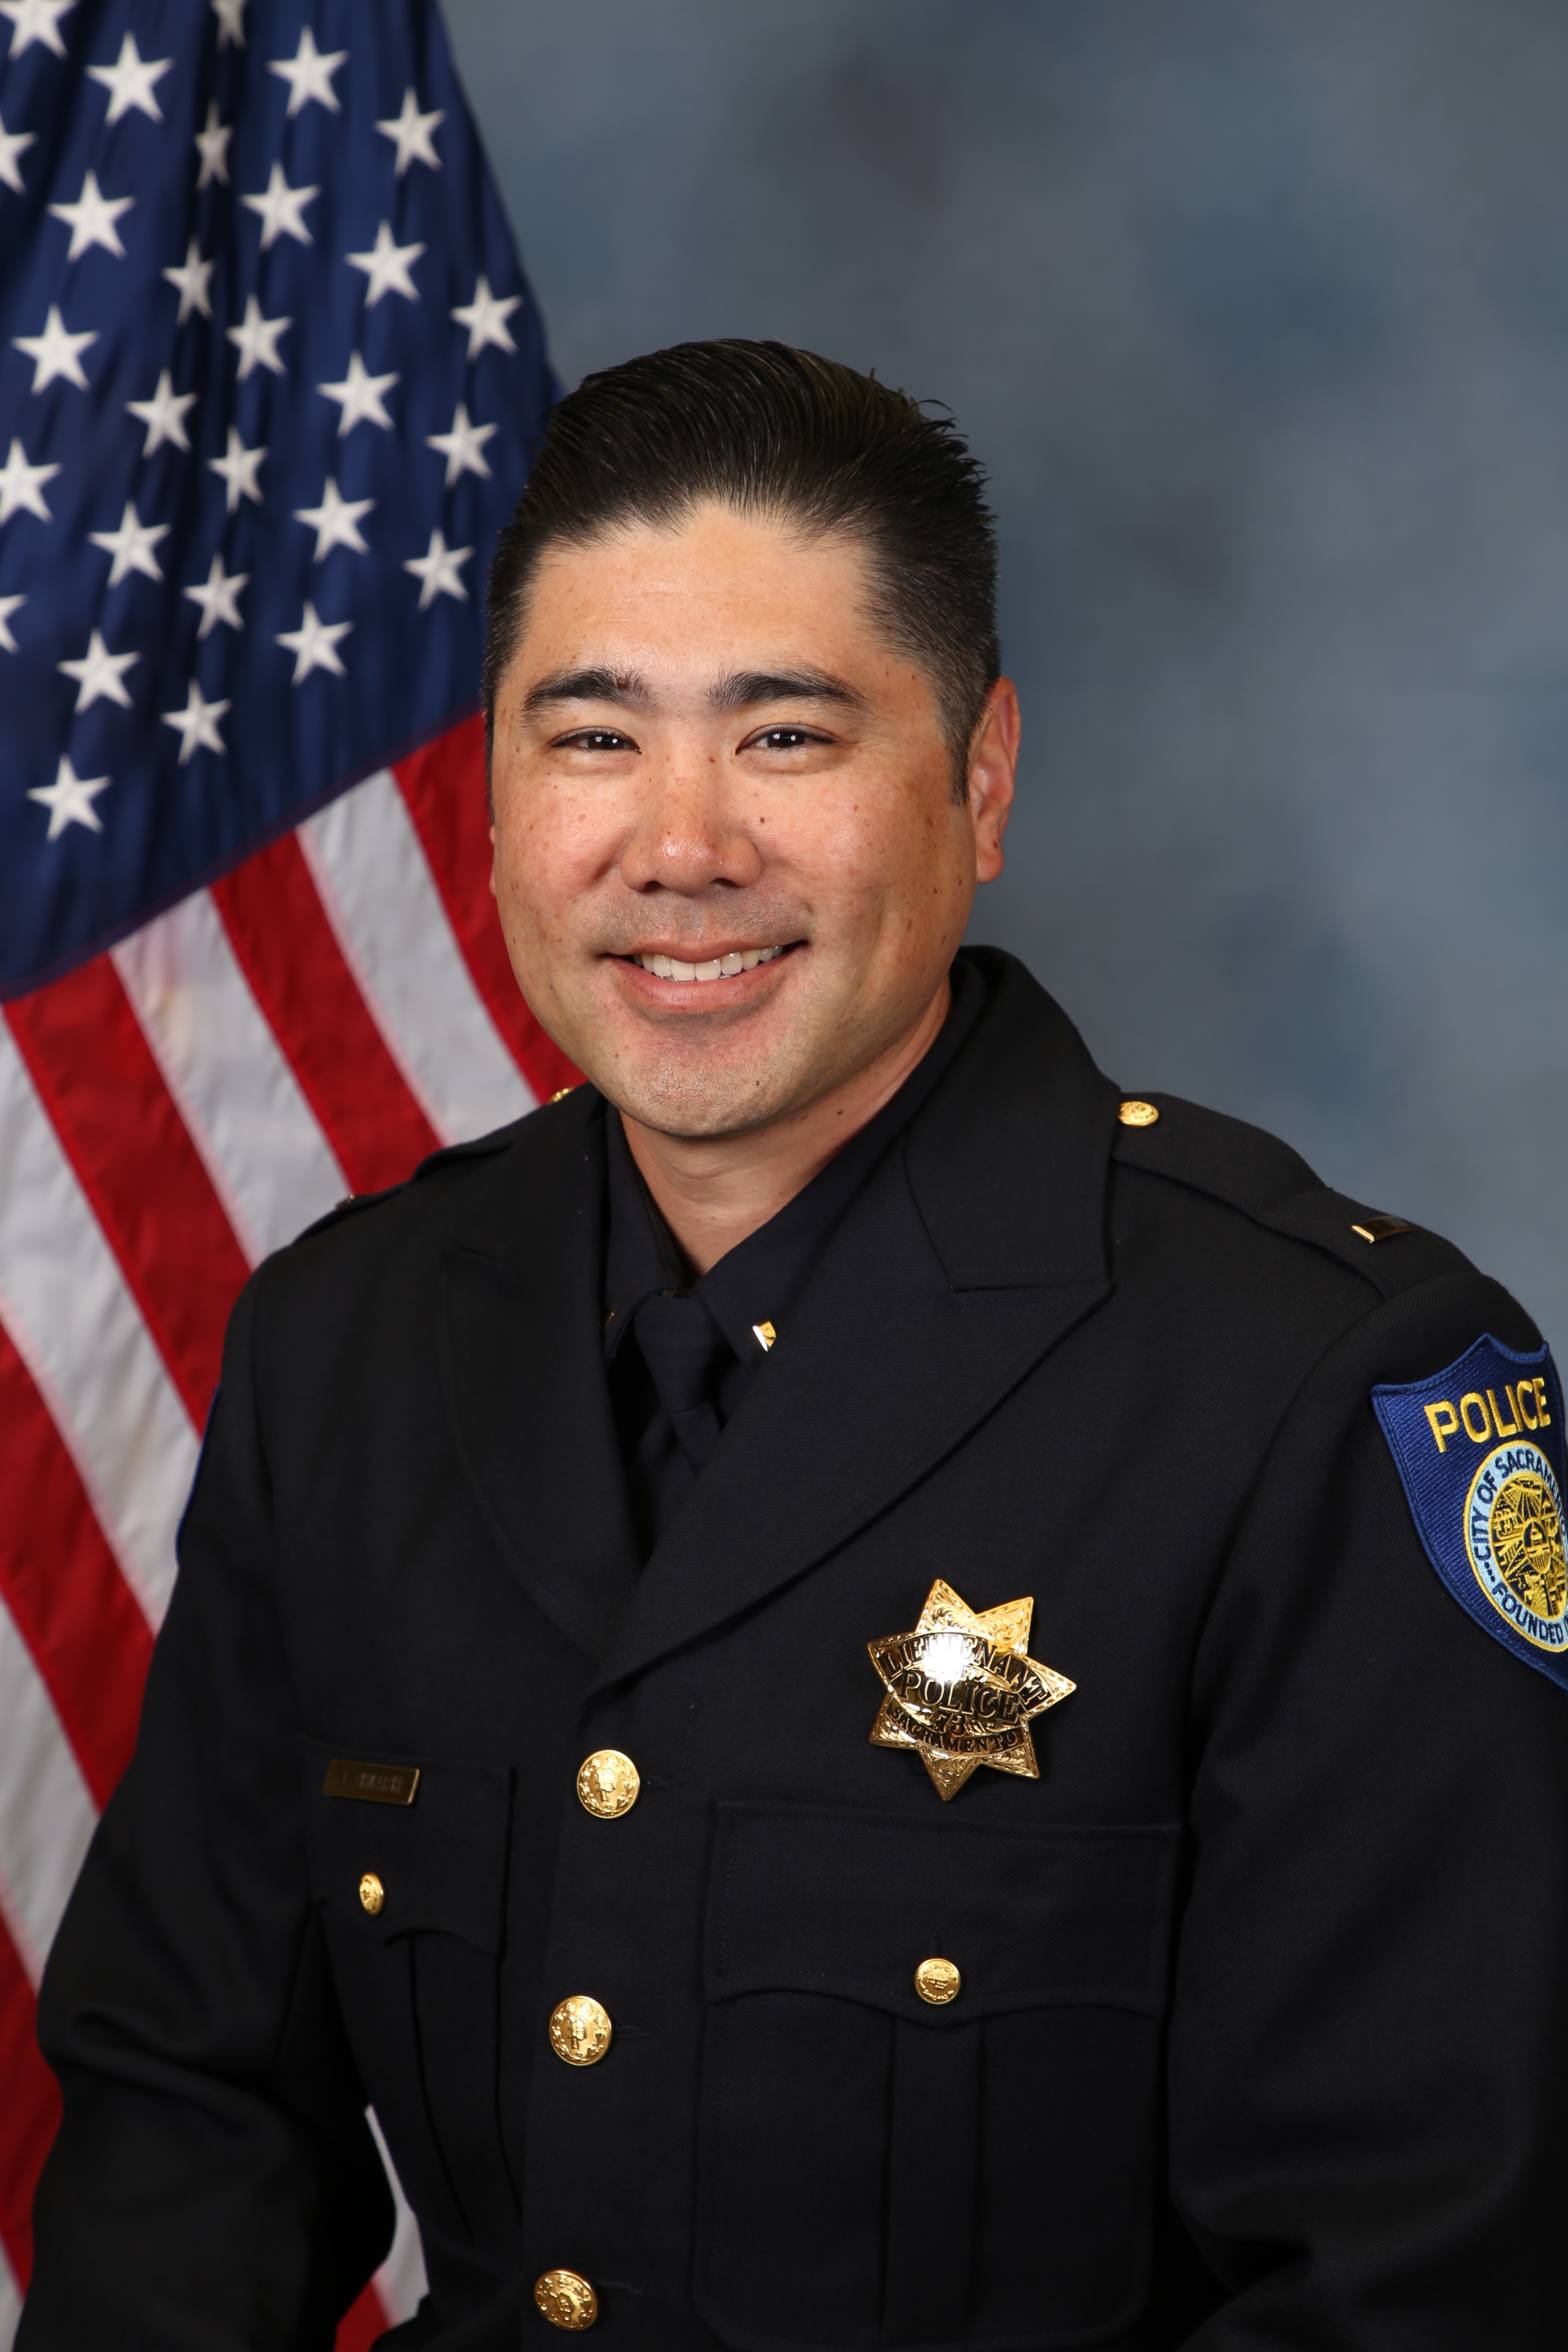 Photo of Jeffrey Shiraishi in uniform standing in front of the American flag.